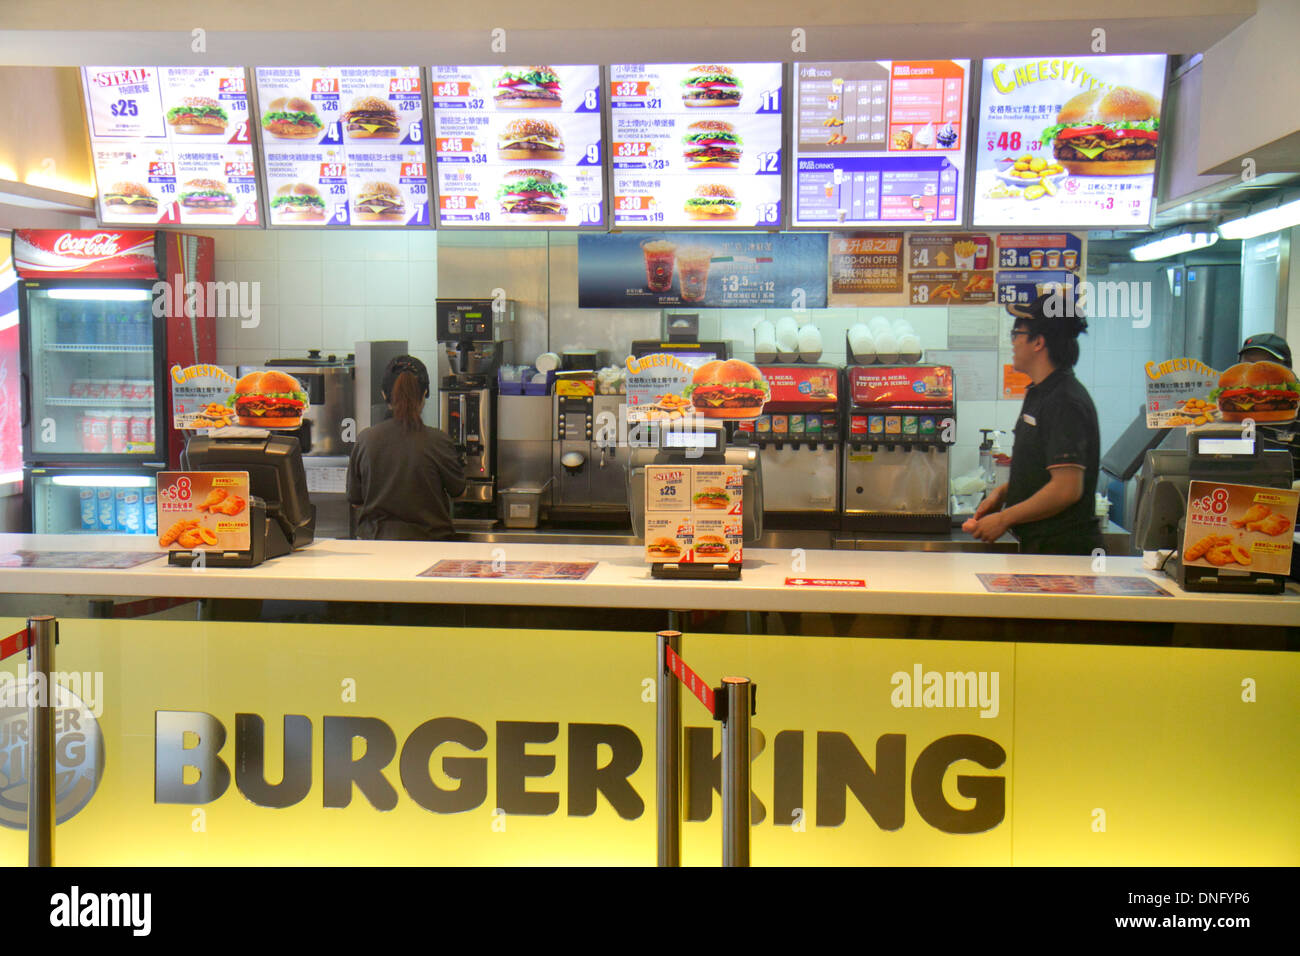 Hong Kong China,HK,Chinese,Island,Fortress Hill,King's Road,Burger King,fast food,restaurant restaurants dining cafe cafes,cuisine,food,counter,menu,C Stock Photo